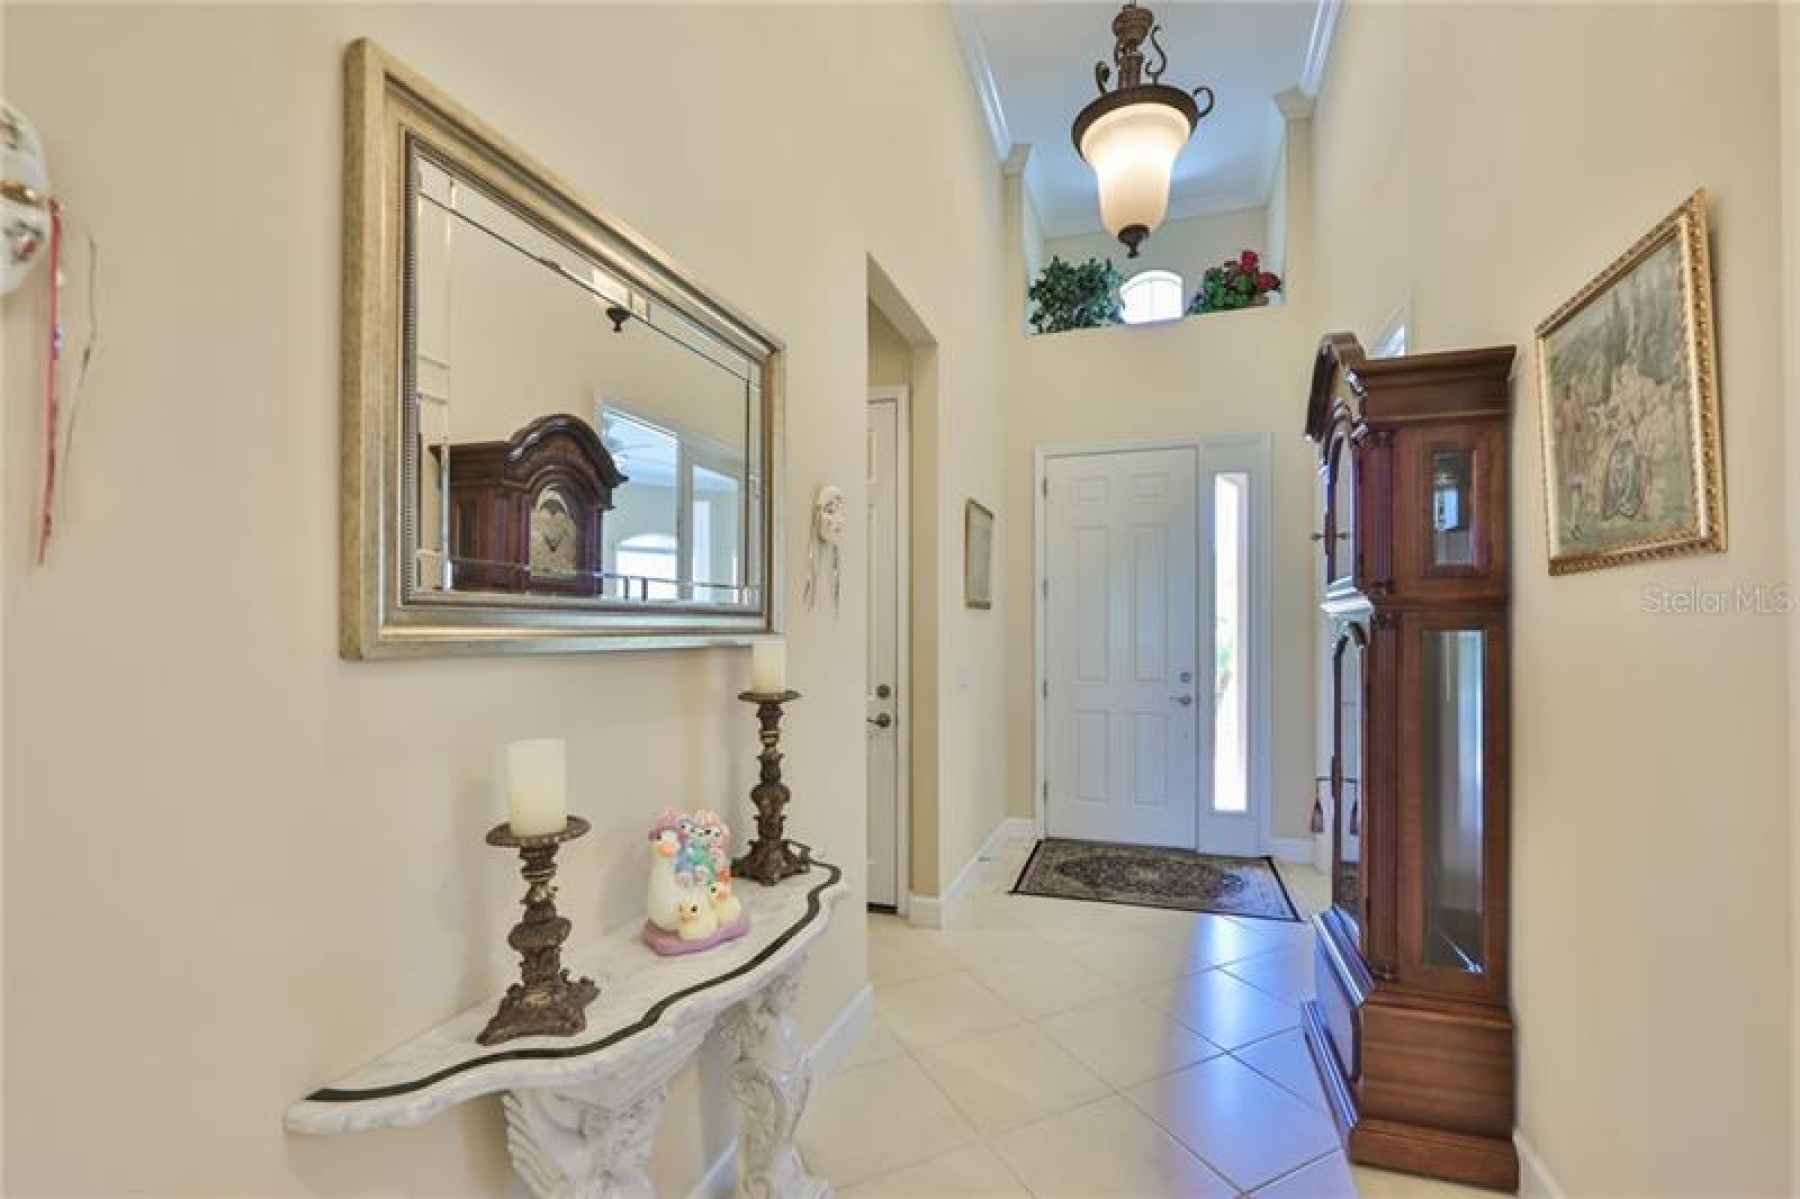 Front foyer is wide, bright and inviting with handsome light fixtures and crown molding.